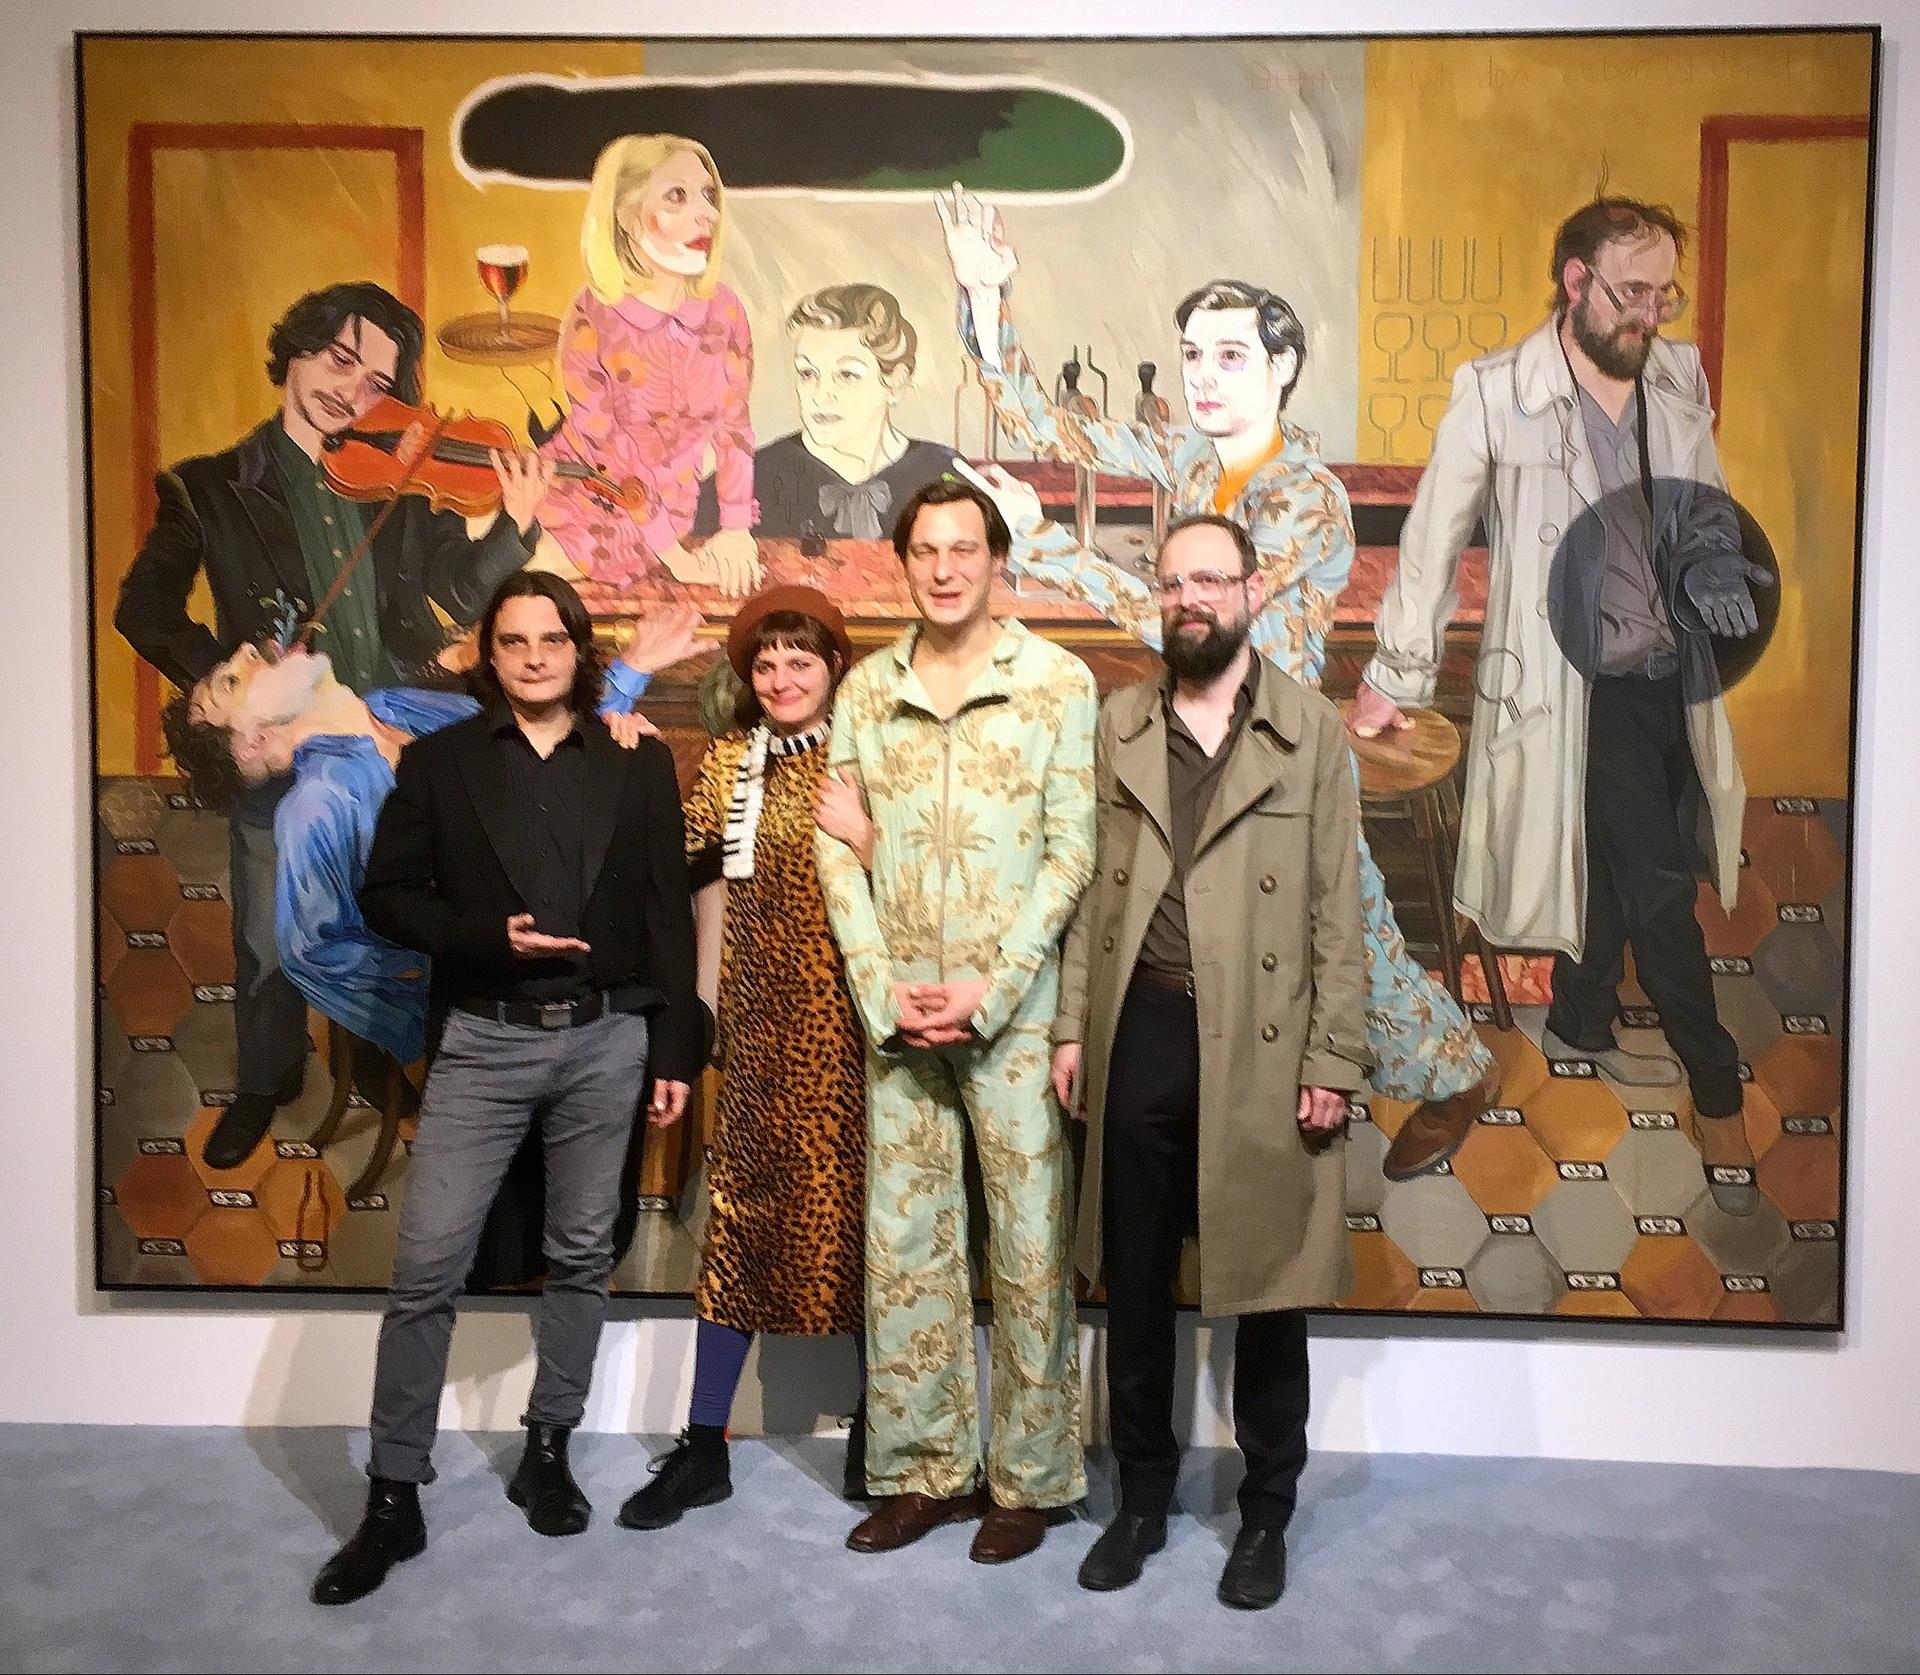 The painting, the performers and the artist Kati Heck Louisa Buck